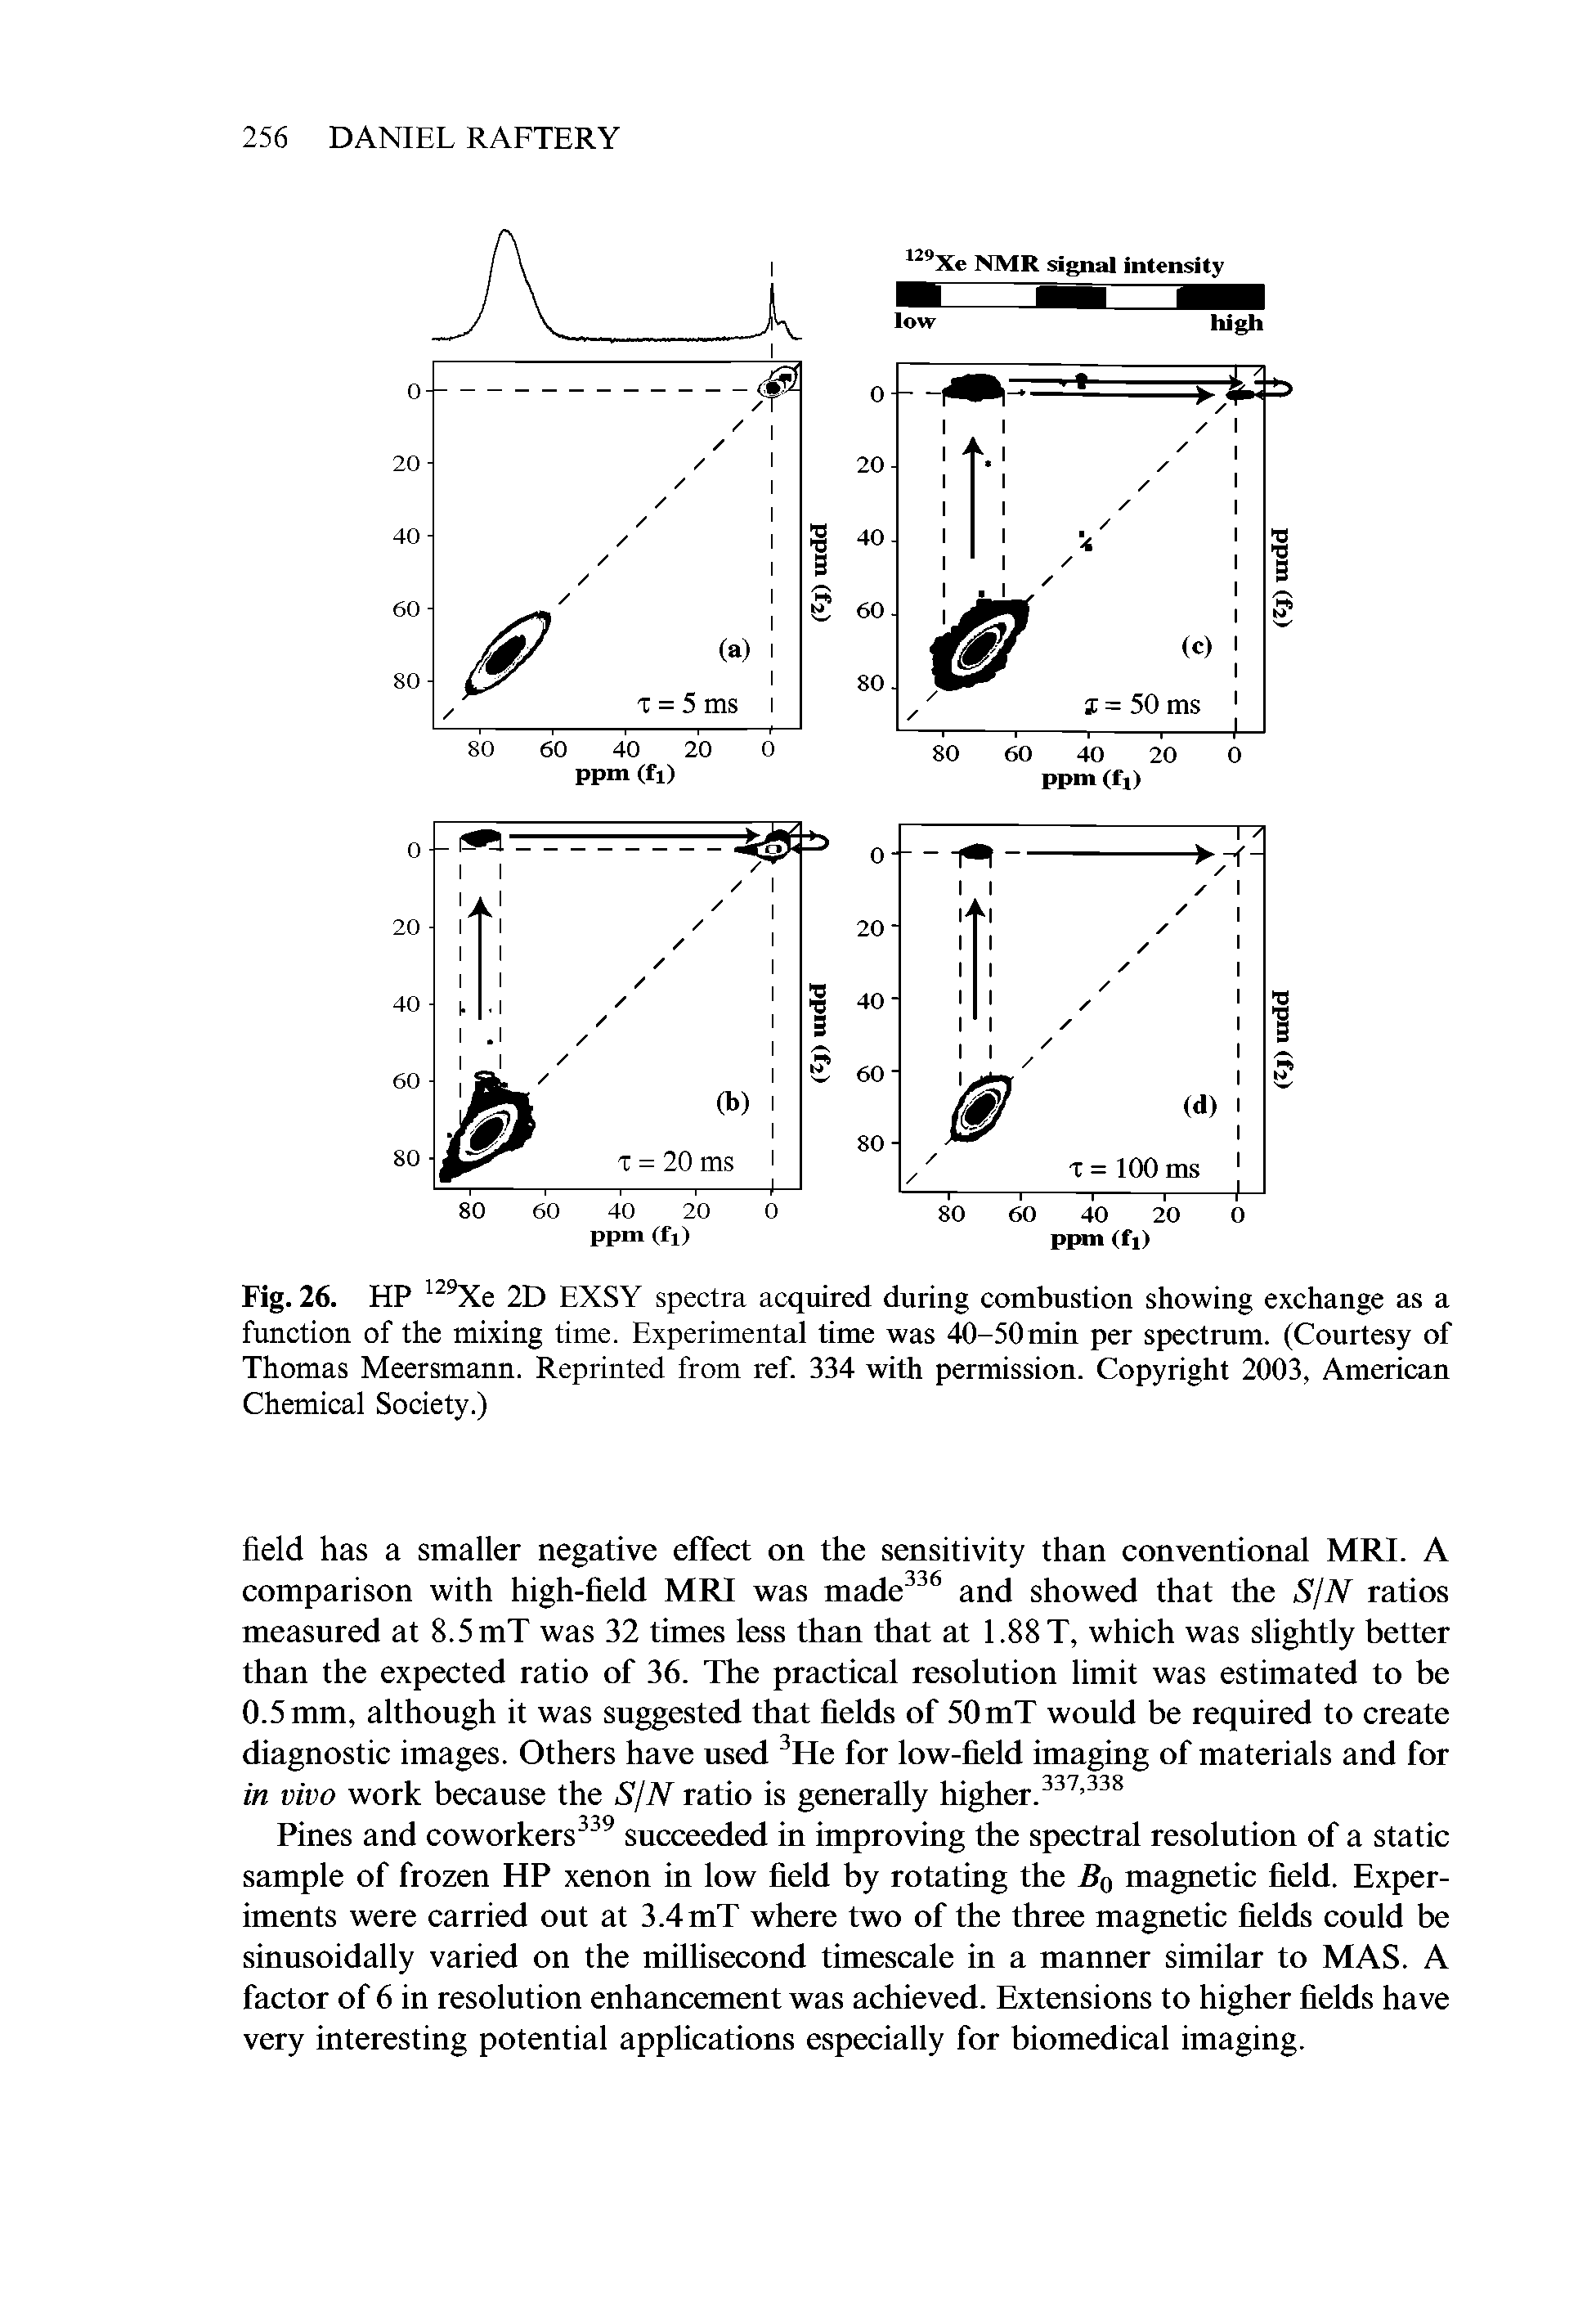 Fig. 26. HP 2D EXSY spectra acquired during combustion showing exchange as a function of the mixing time. Experimental time was 40-50min per spectrum. (Courtesy of Thomas Meersmann. Reprinted from ref. 334 with permission. Copyright 2003, American Chemical Society.)...